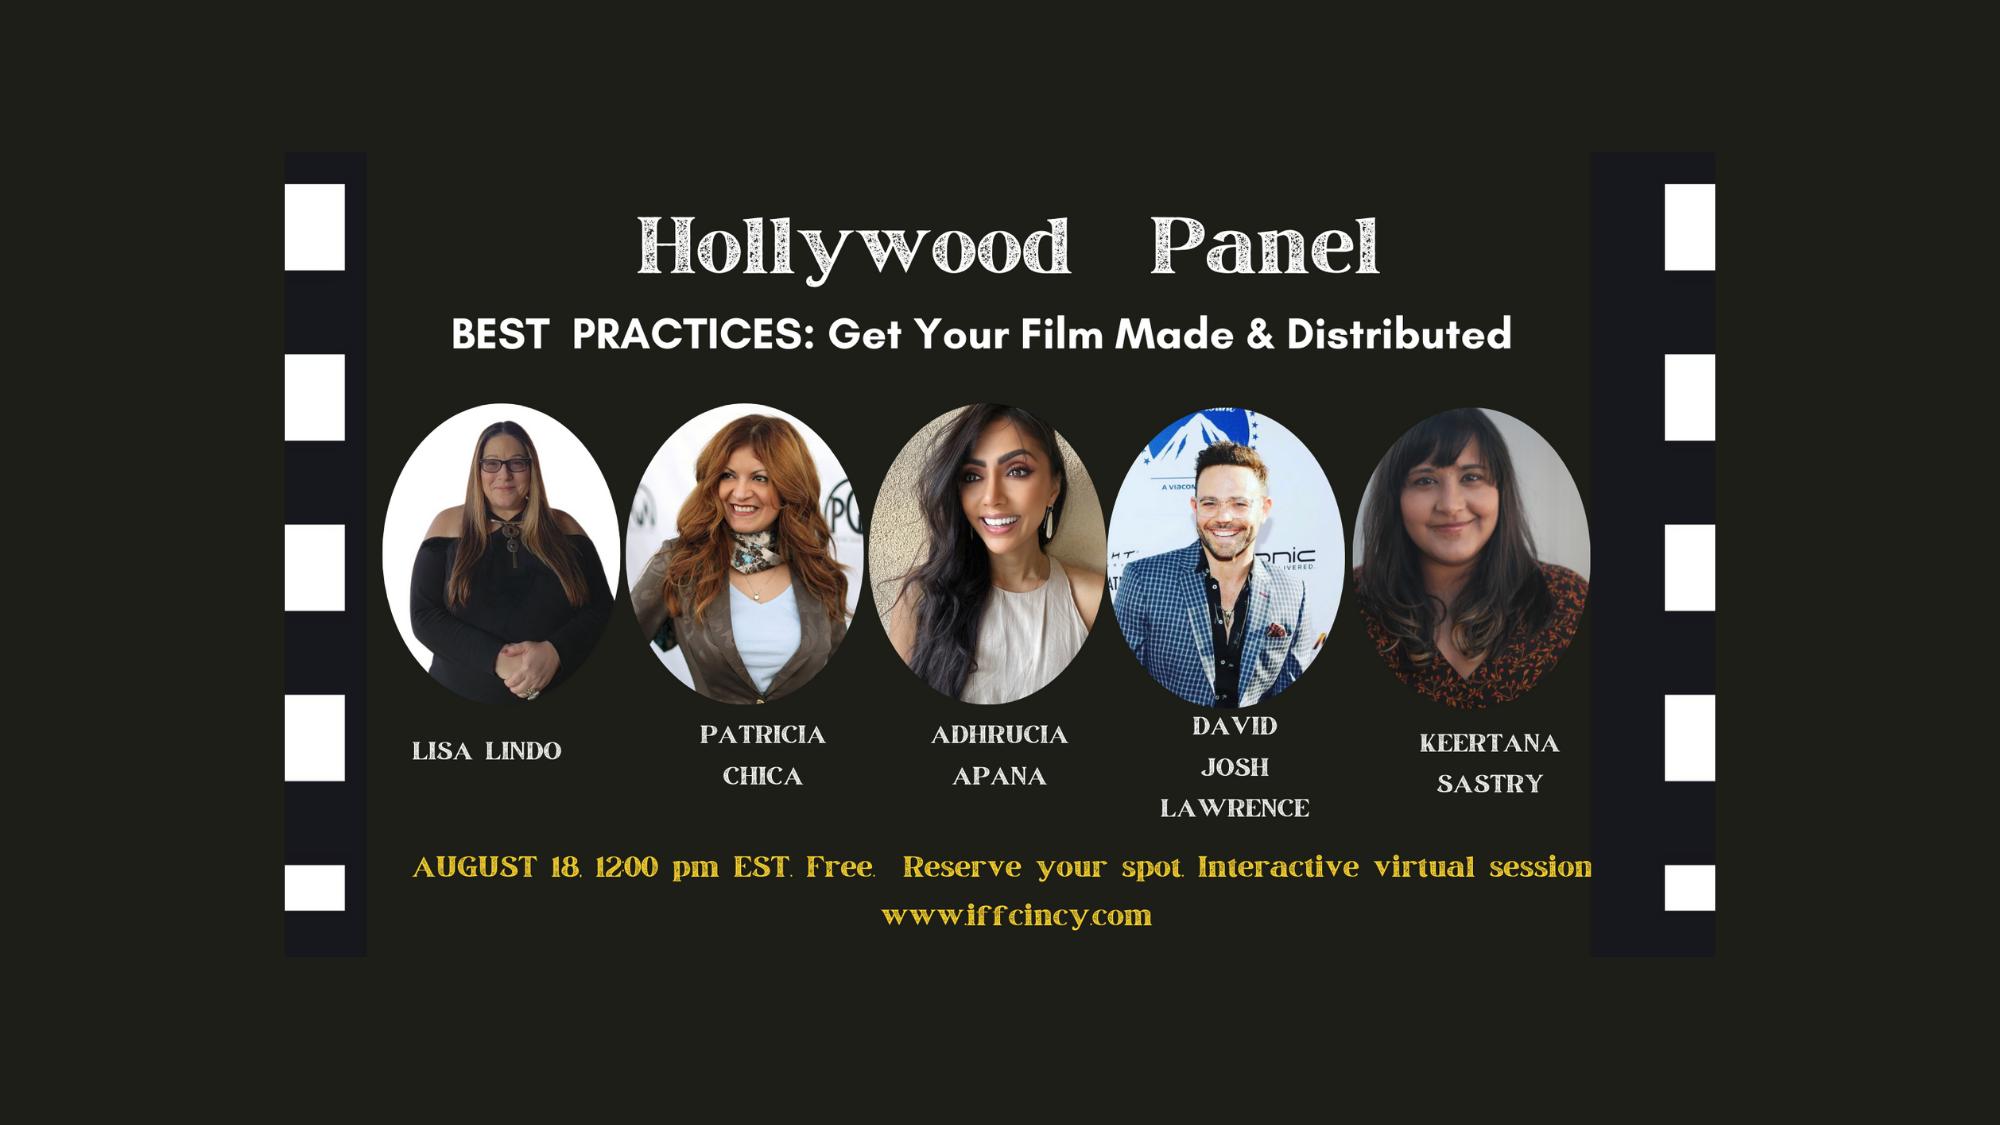 Holywood Panel: Best Practices to Get Your Film Made and Distributed